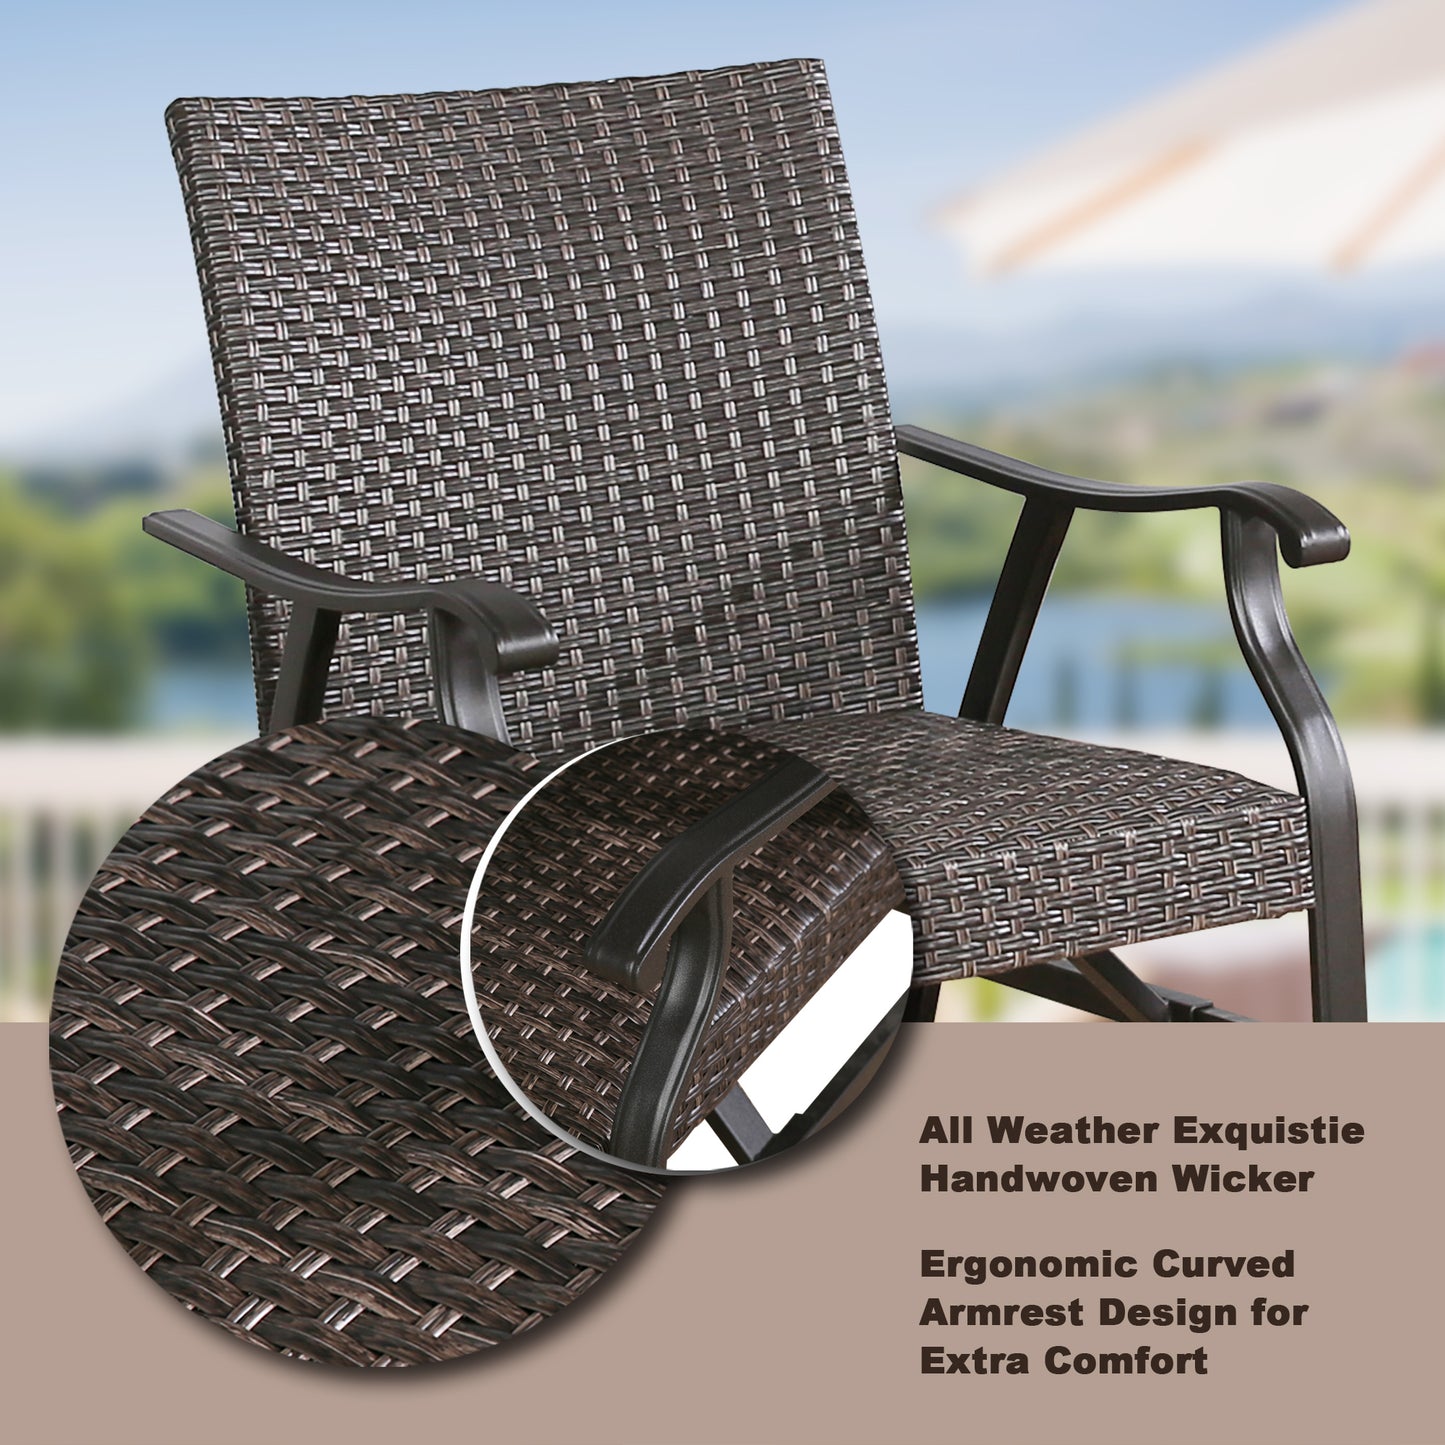 Outdoor Wicker Chairs Patio Wicker Padded Rocking Motion Conversation Chair for Poolside, Garden, Porch, Set of 2